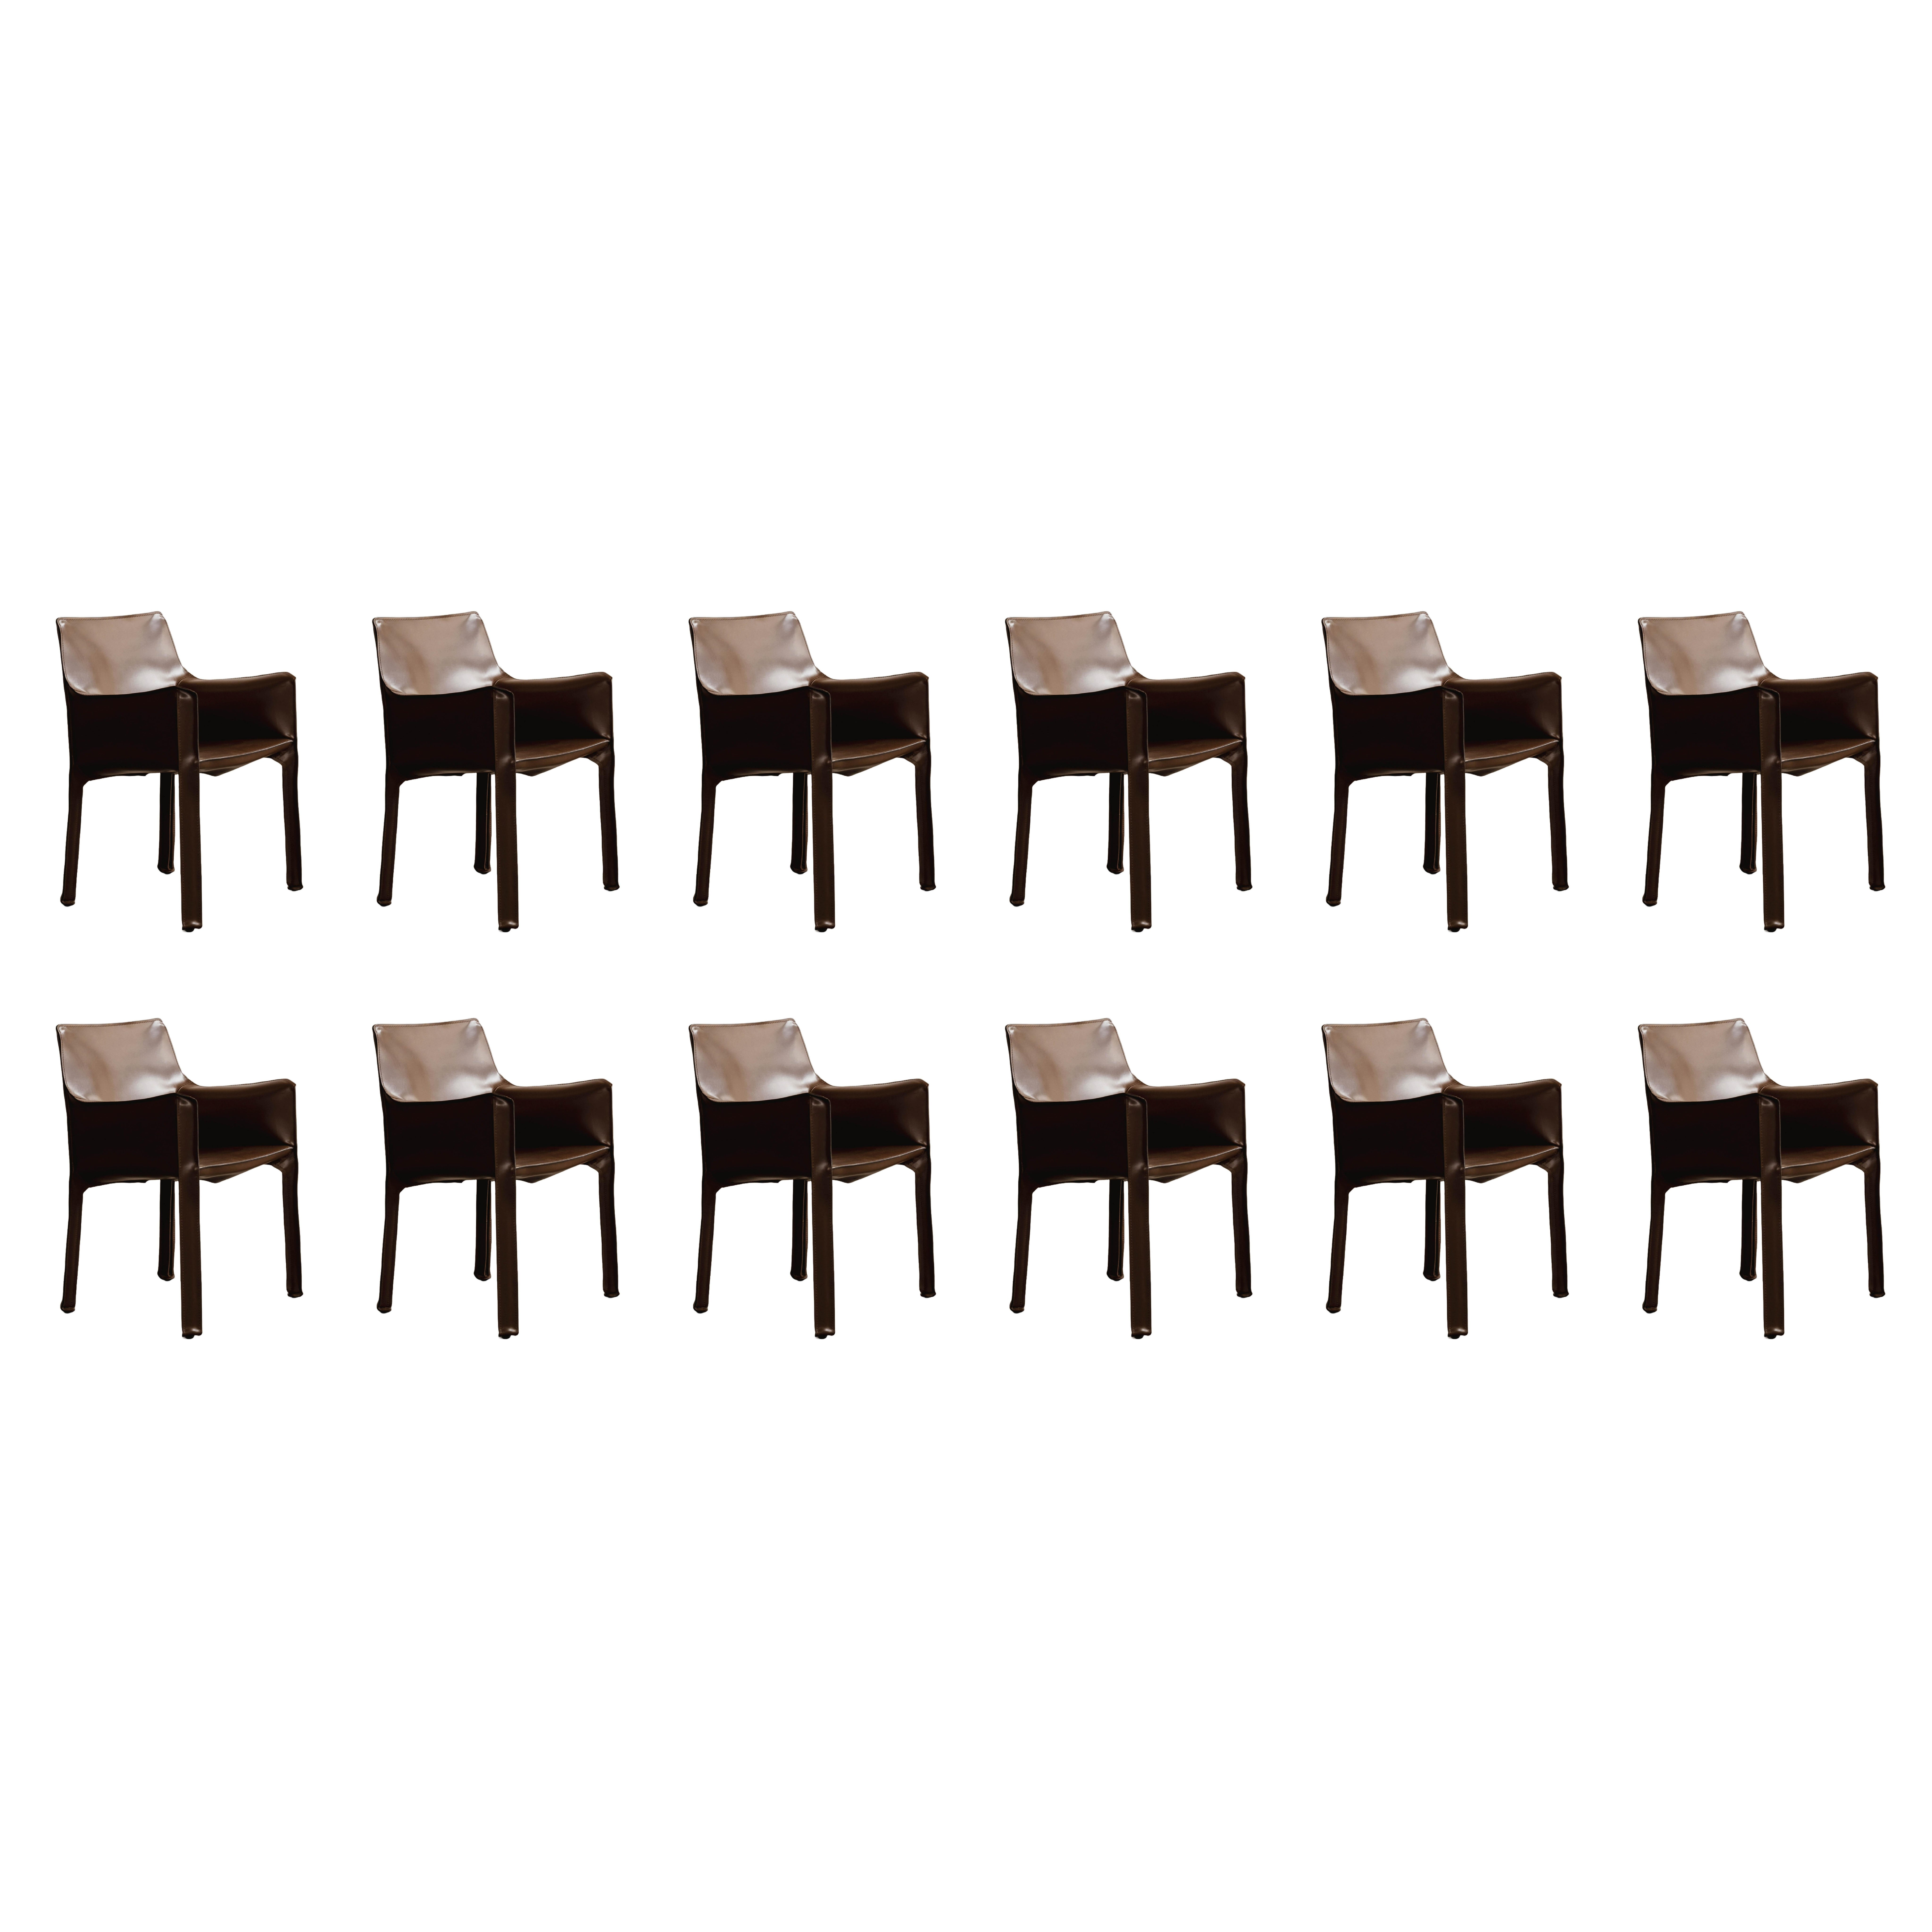 Mario Bellini "CAB 413” Dining Chairs for Cassina, 1977, Set of 12